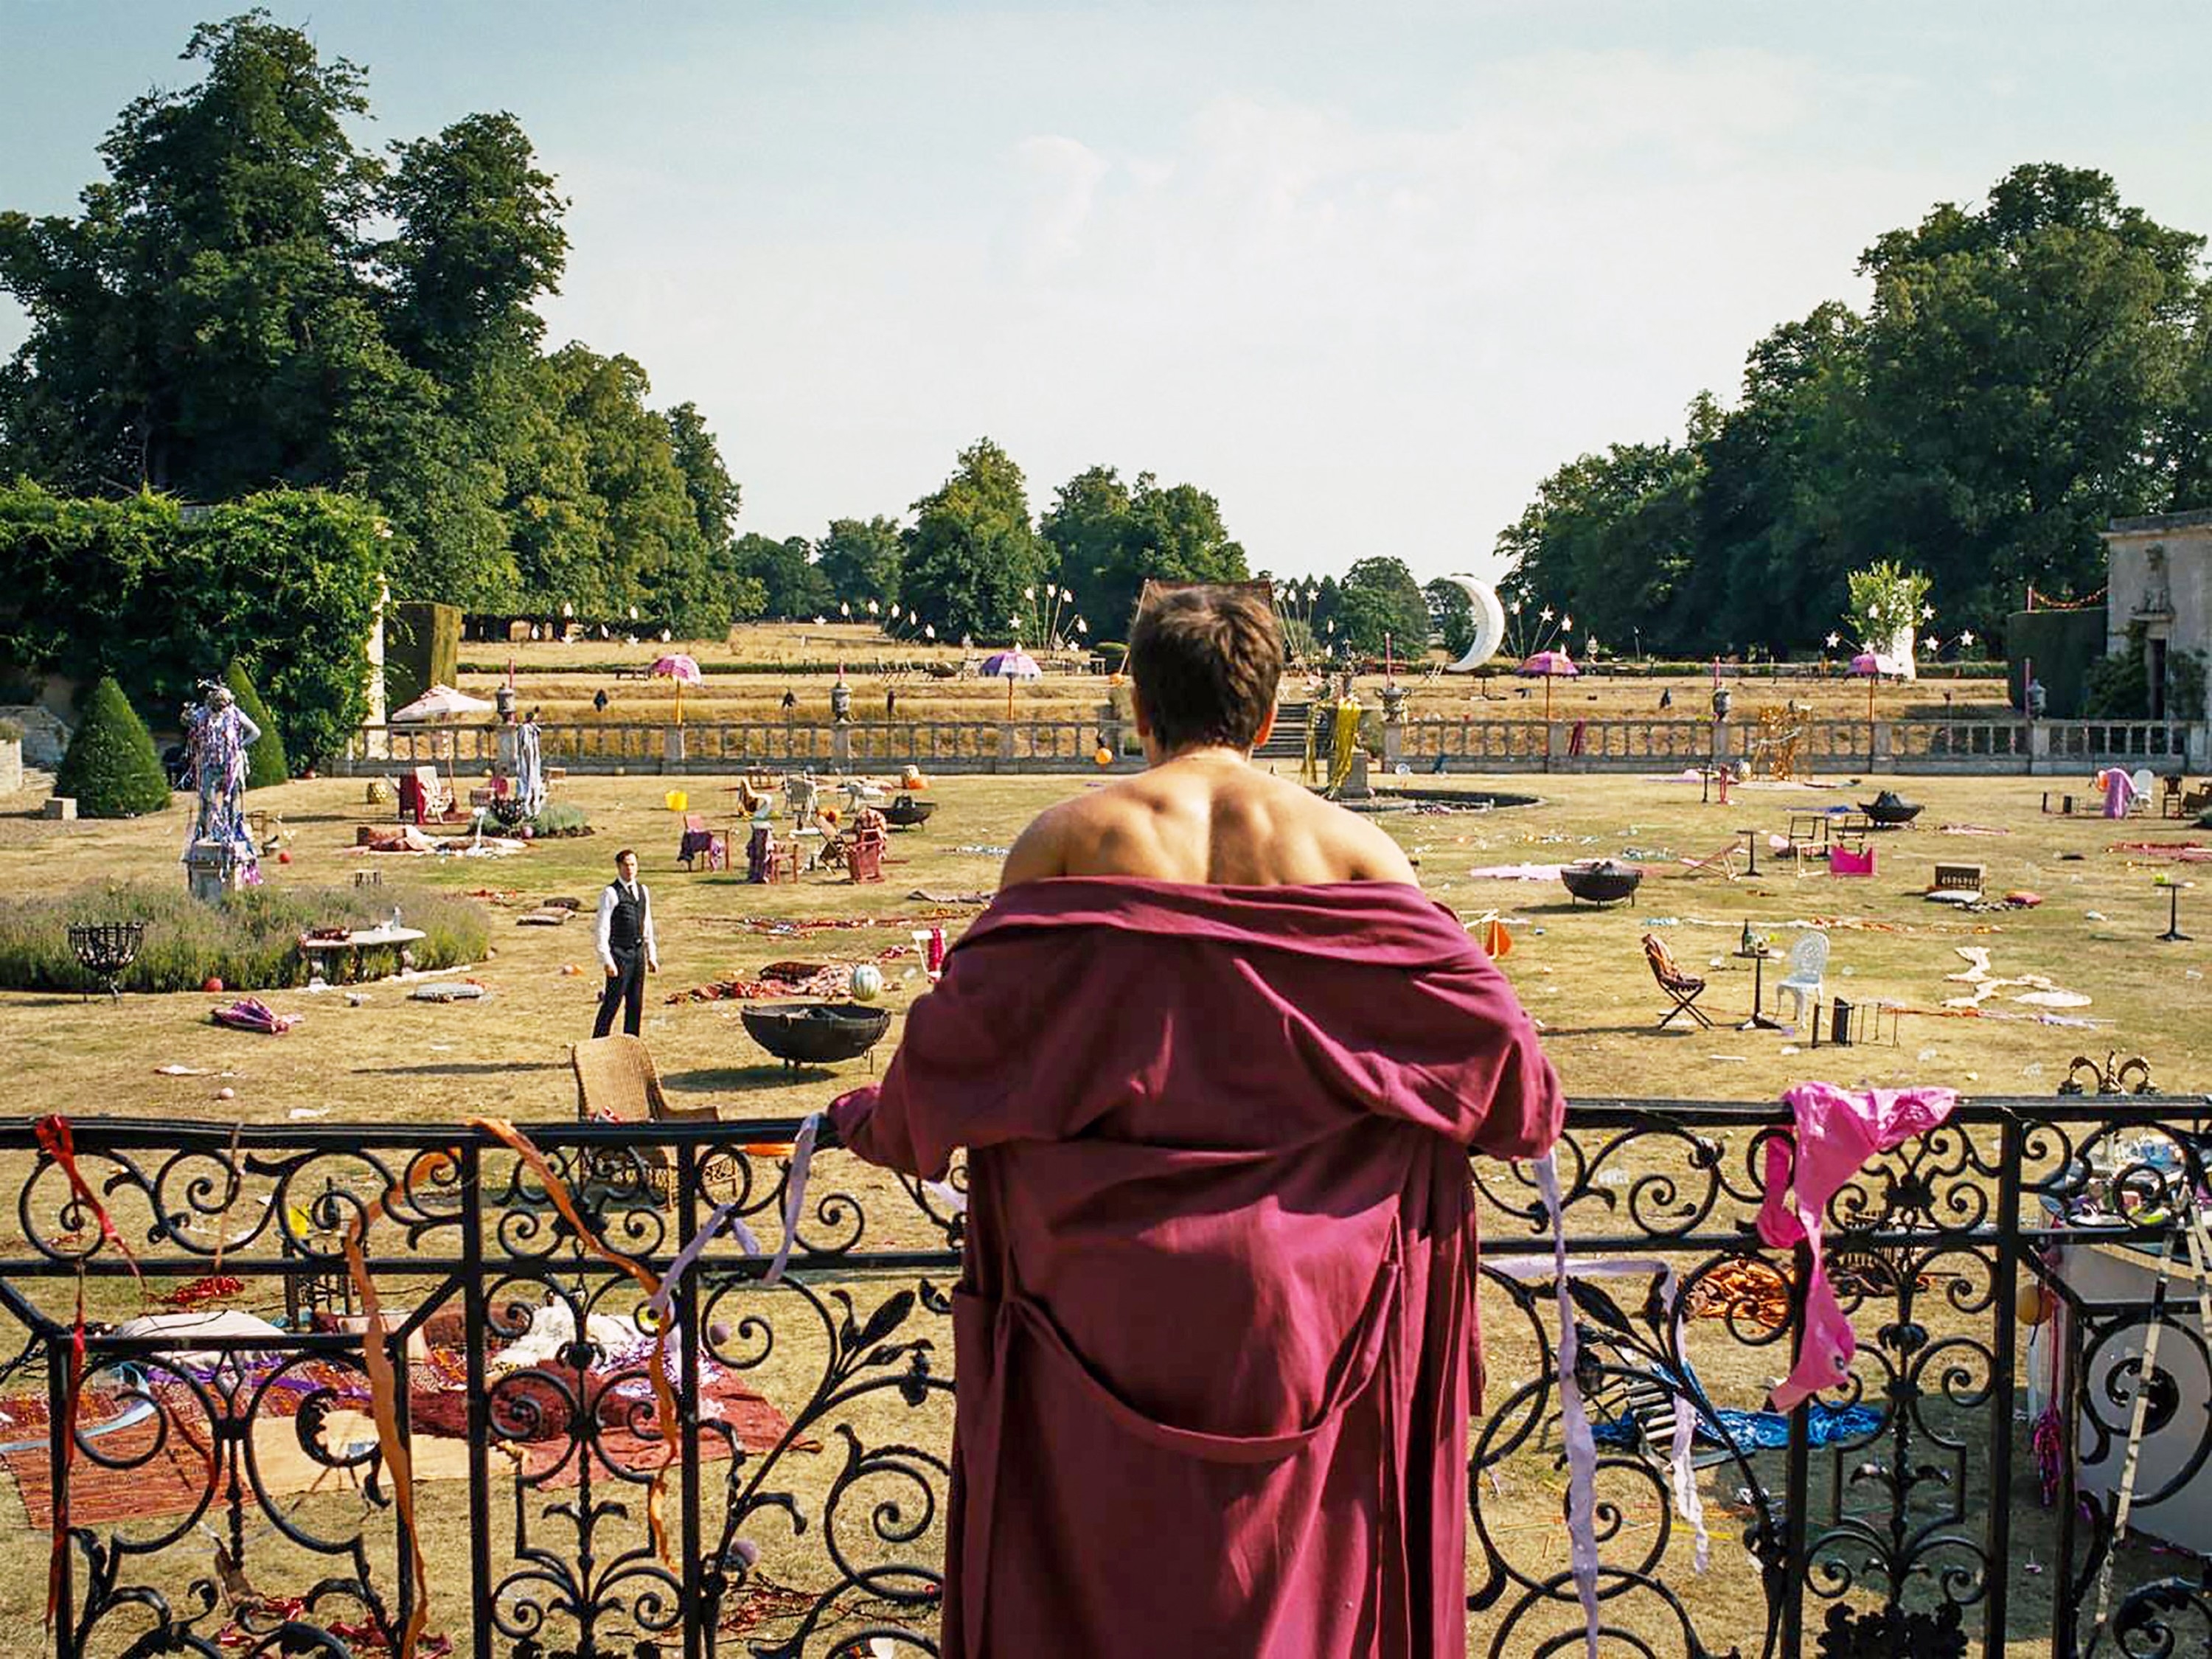 Barry Keogh in burgundy robe overlooking a park with people and scattered objects in Saltburn